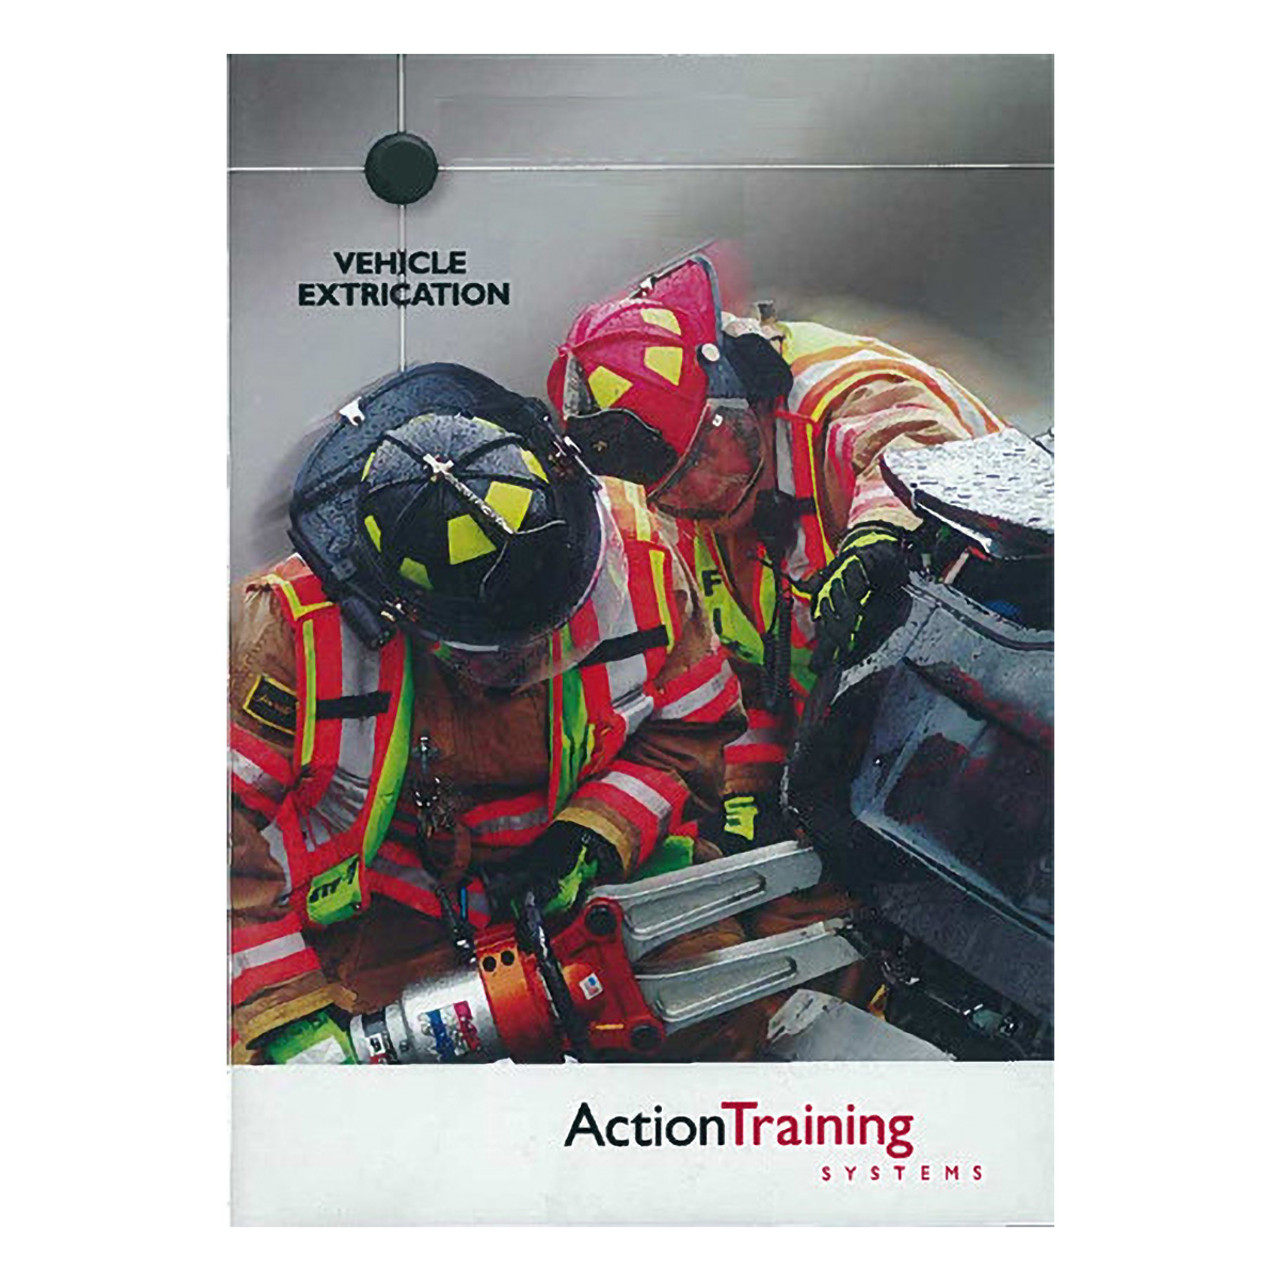 Action Training Systems #8 - Hybrid and Electric Vehicle Extrication and Rescue